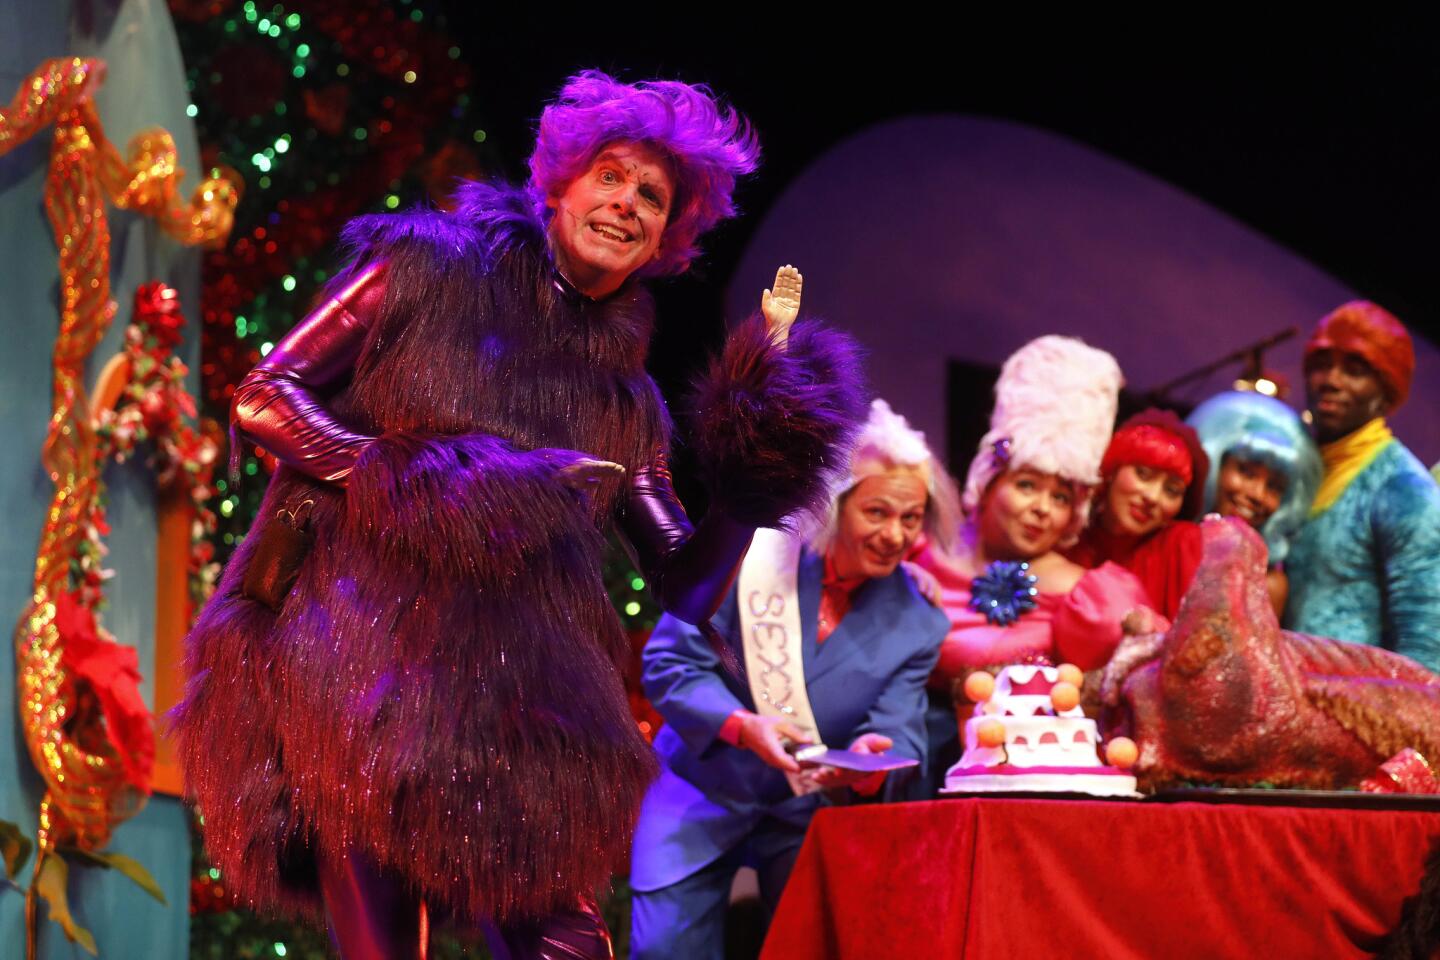 Matt Walker, foreground, portrays the Grinch-meets-Prince character the Princh in Troubadour Theater Company's "How the Princh Stole Christmas!" The wacky tale of a loner at yuletide is performed at the El Portal in North Hollywood.